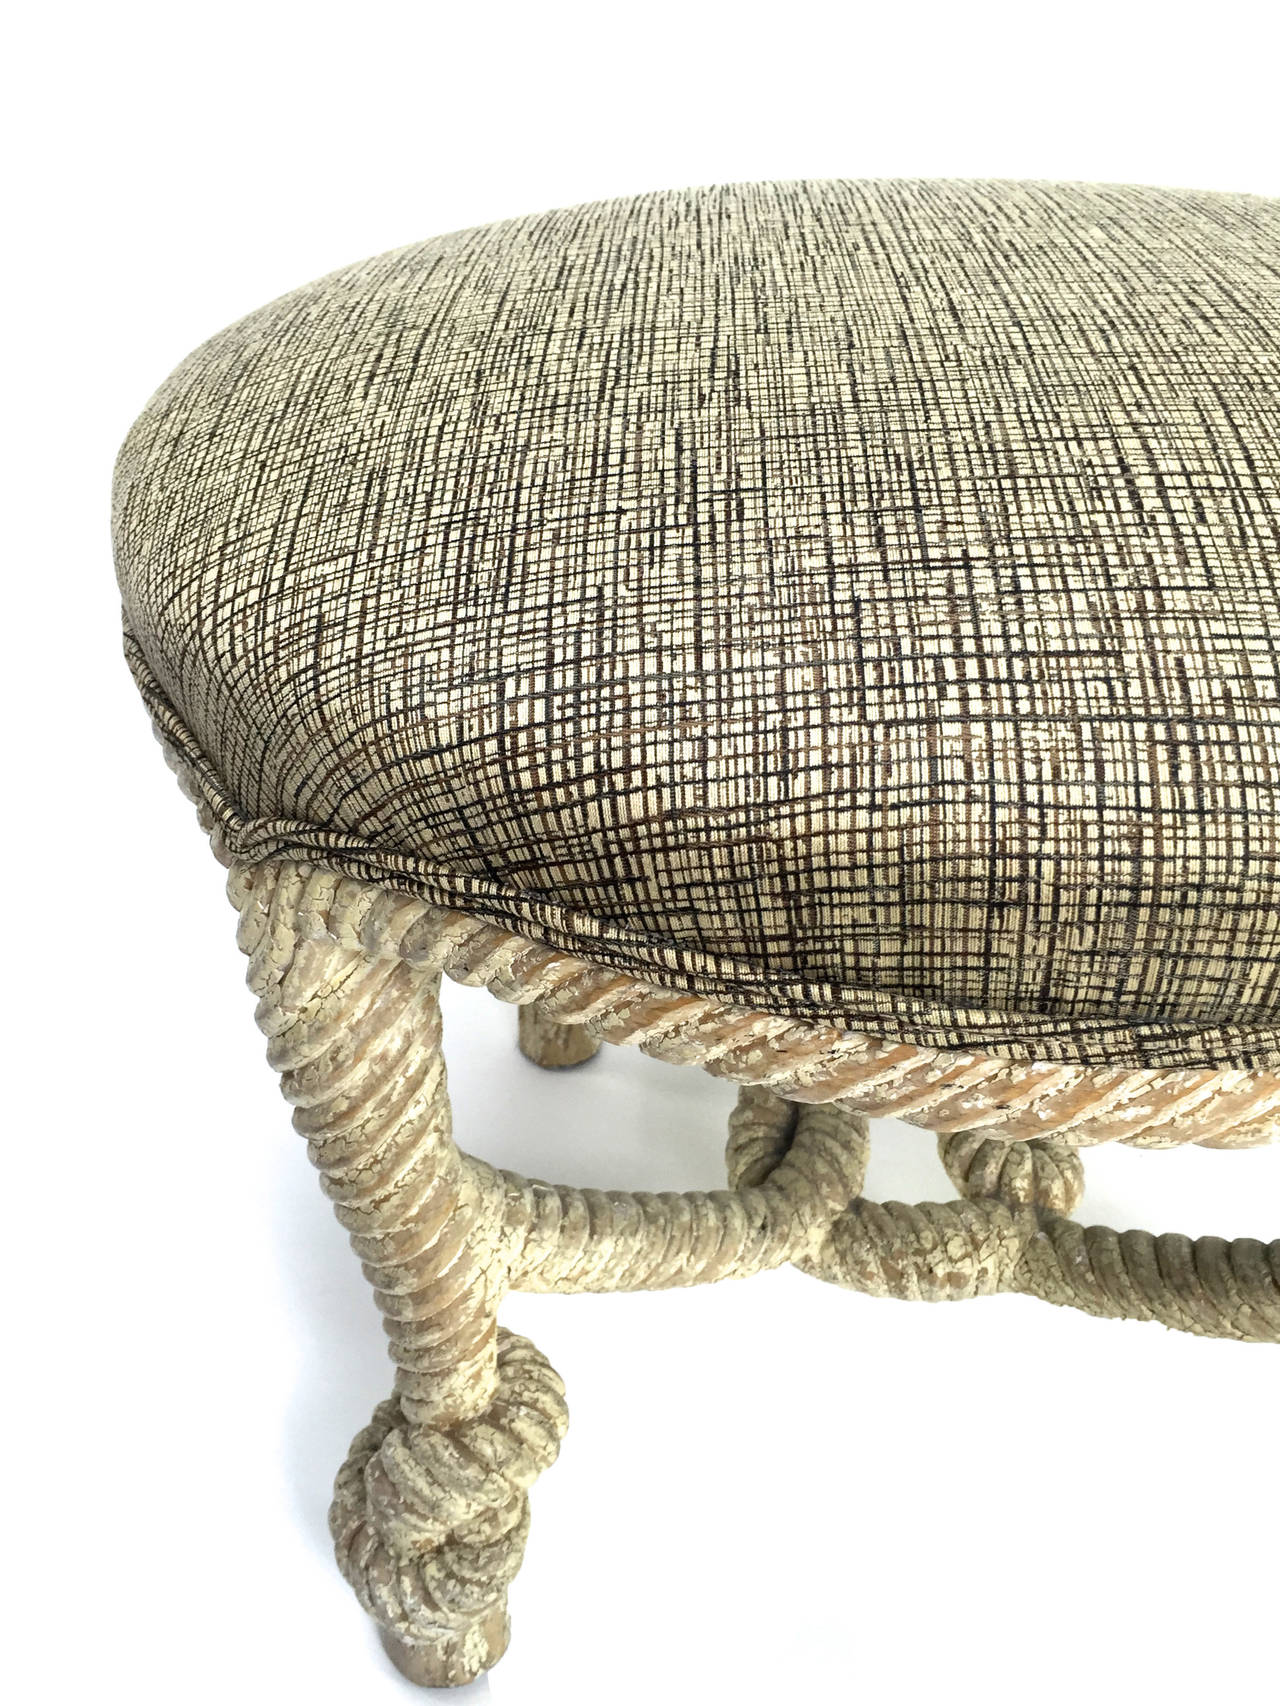 American Rope and Tassel Tabouret Stools by Michael Taylor